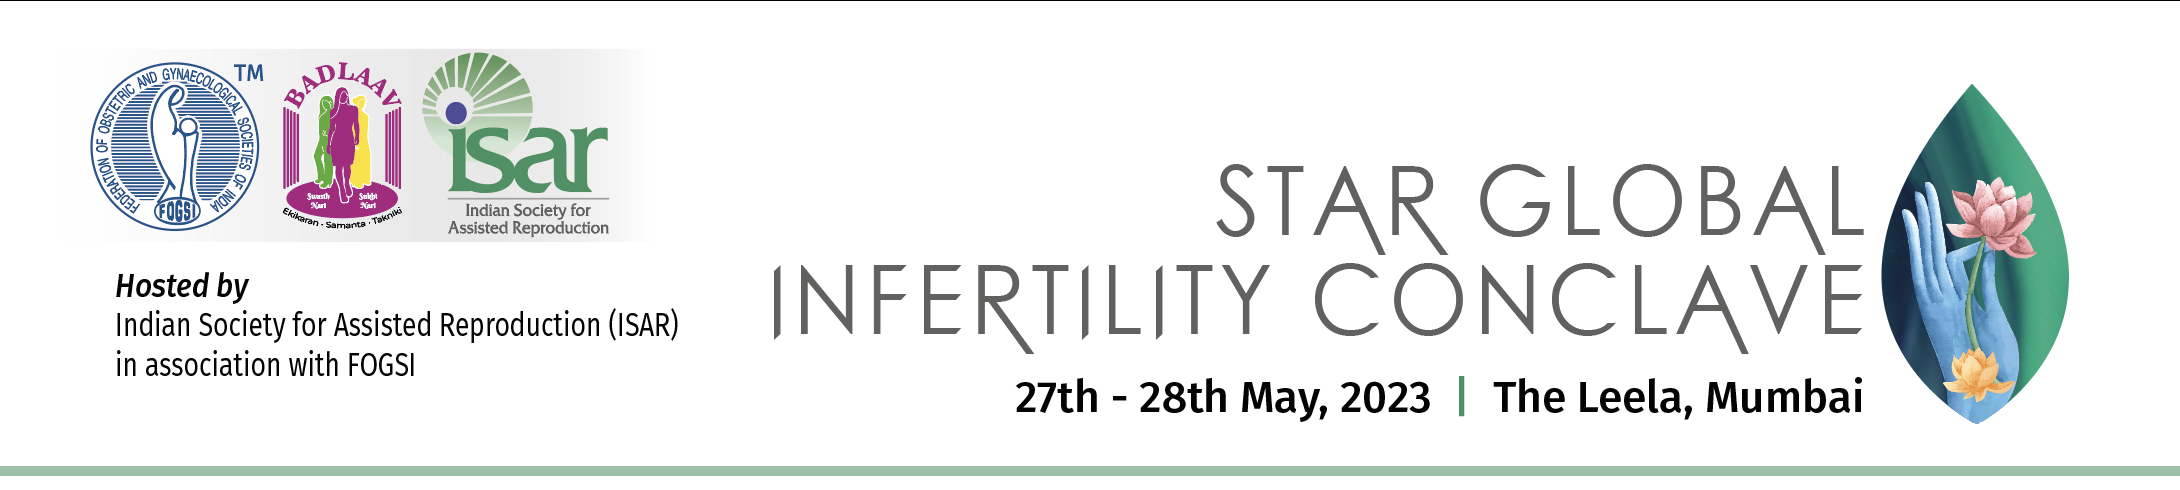 Star Global Infertility Conclave 2023